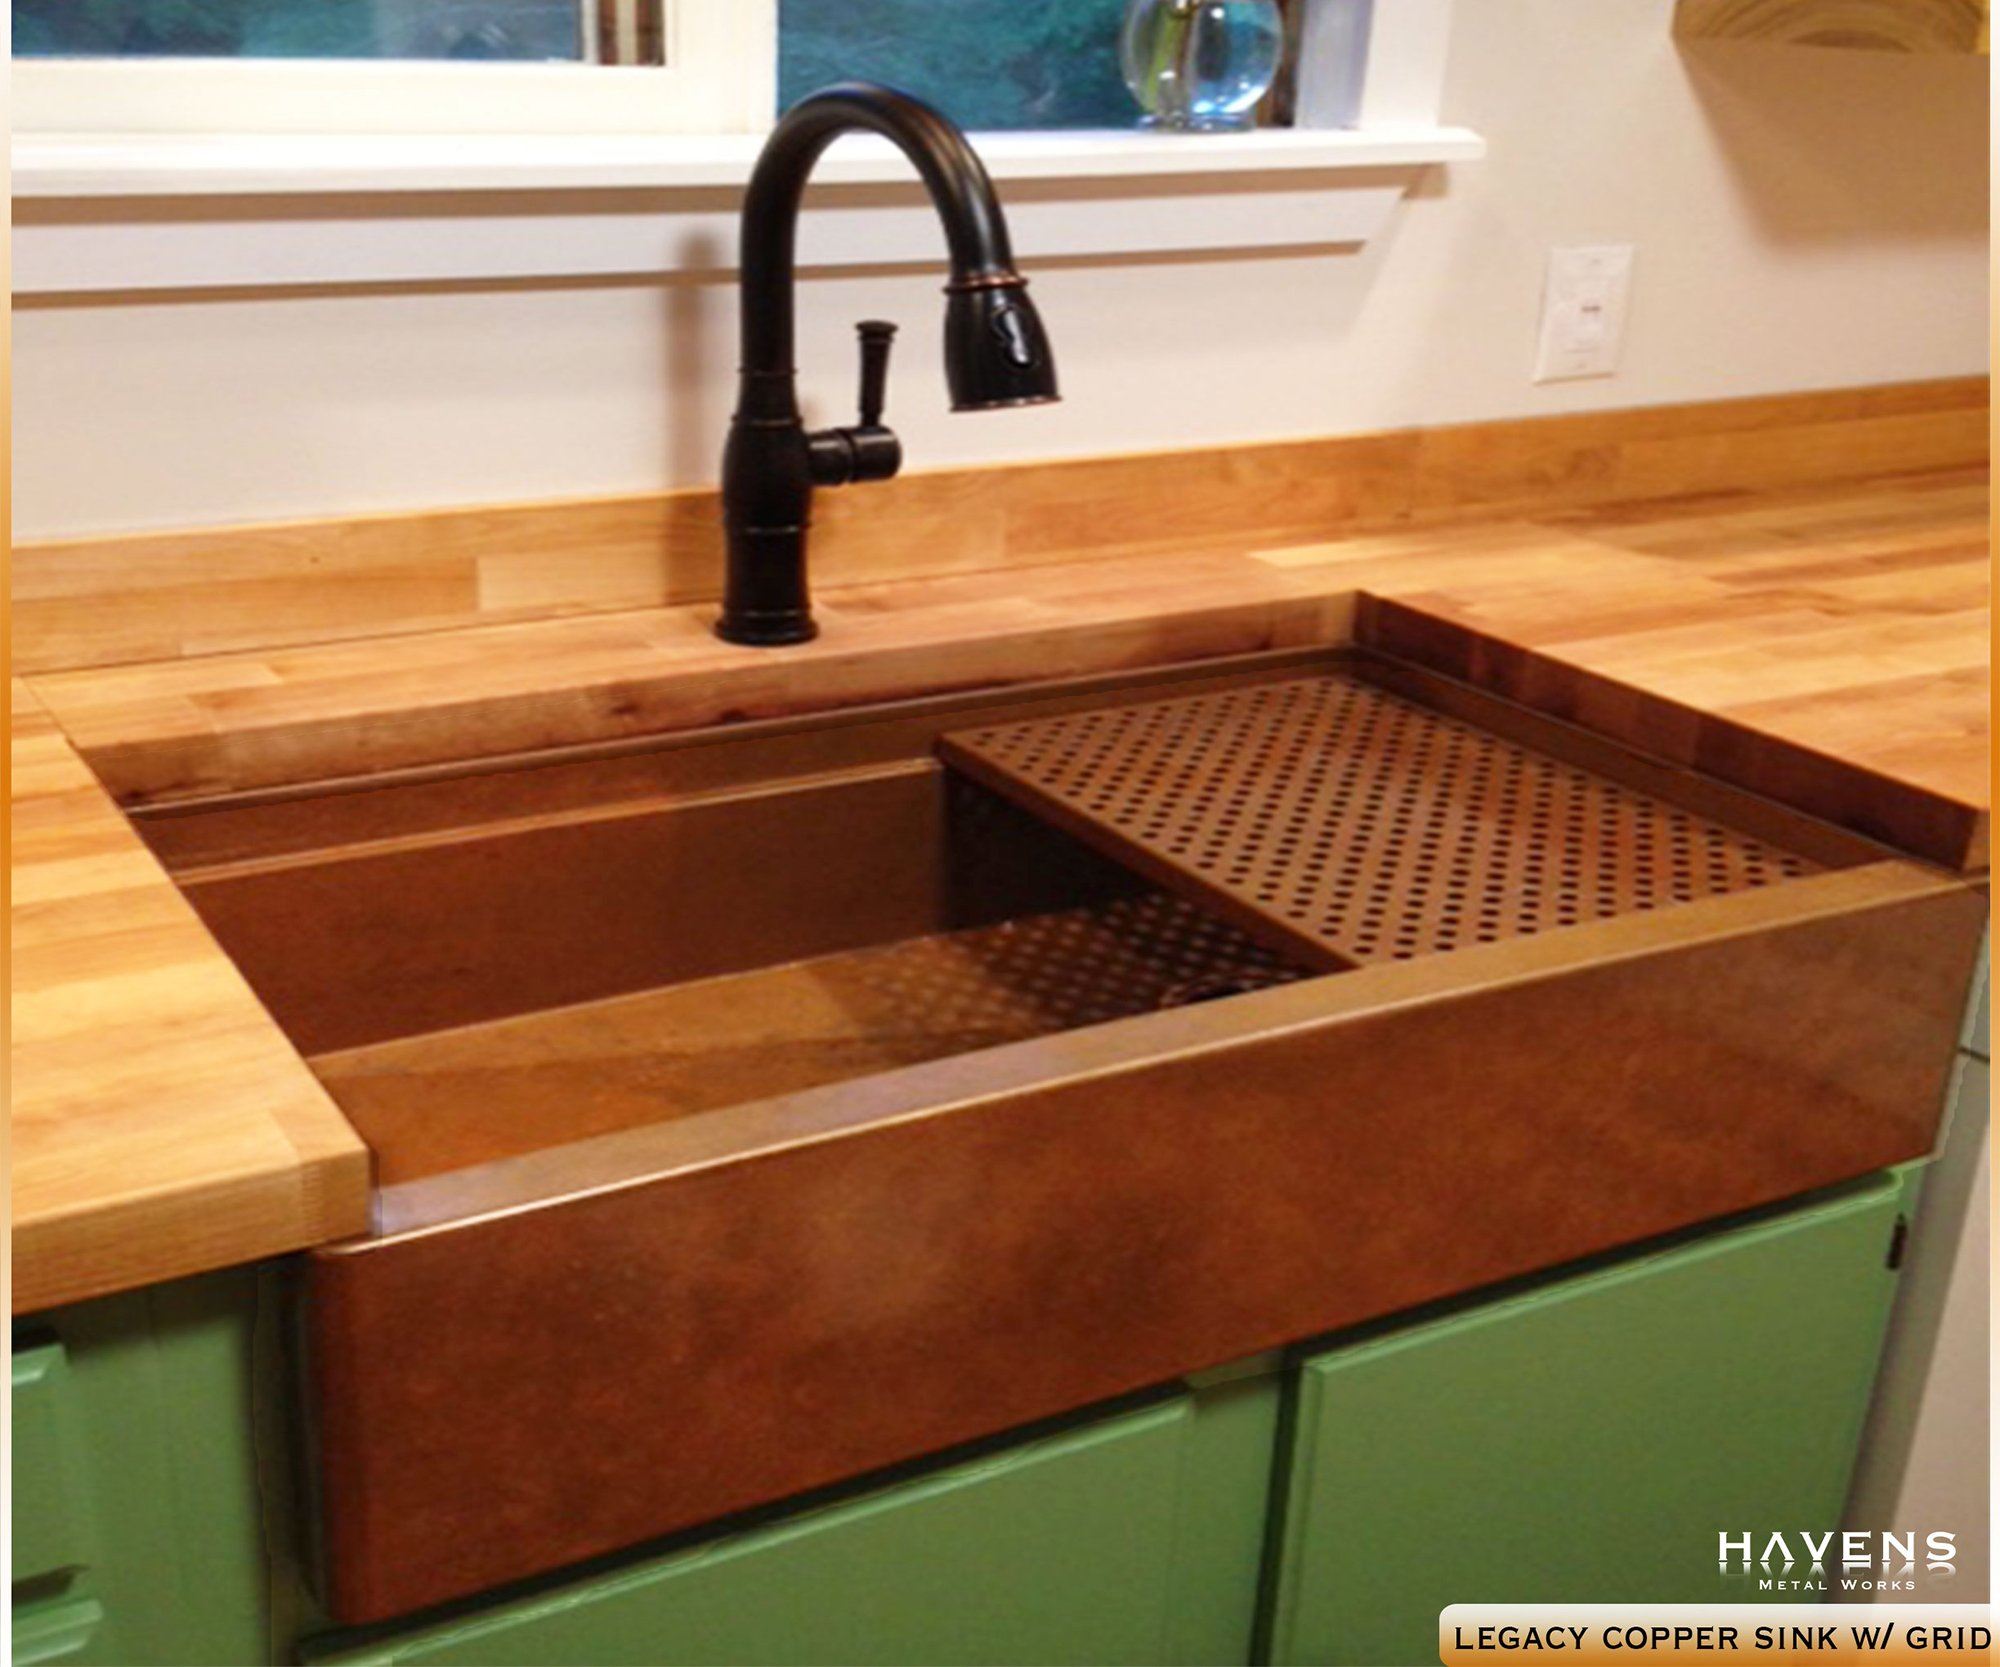 Legacy copper farm style kitchen sink installed as an undermount with a copper faucet.